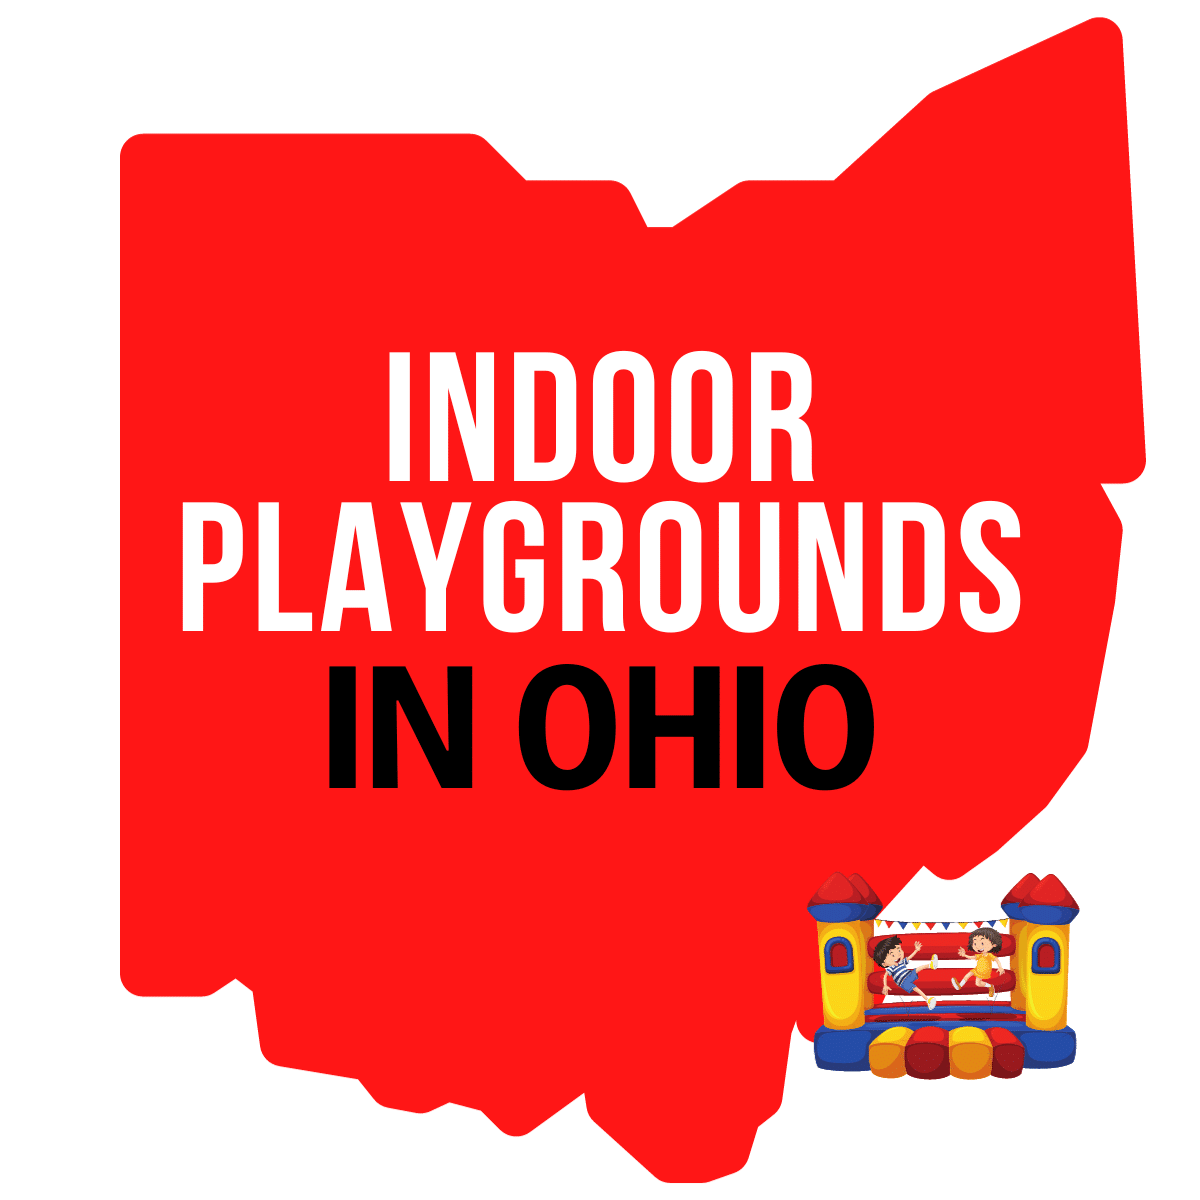 square image with a large red map containing the text Indoor Playgrounds in Ohio and a small graphic of a bouncy house in the bottom right corner